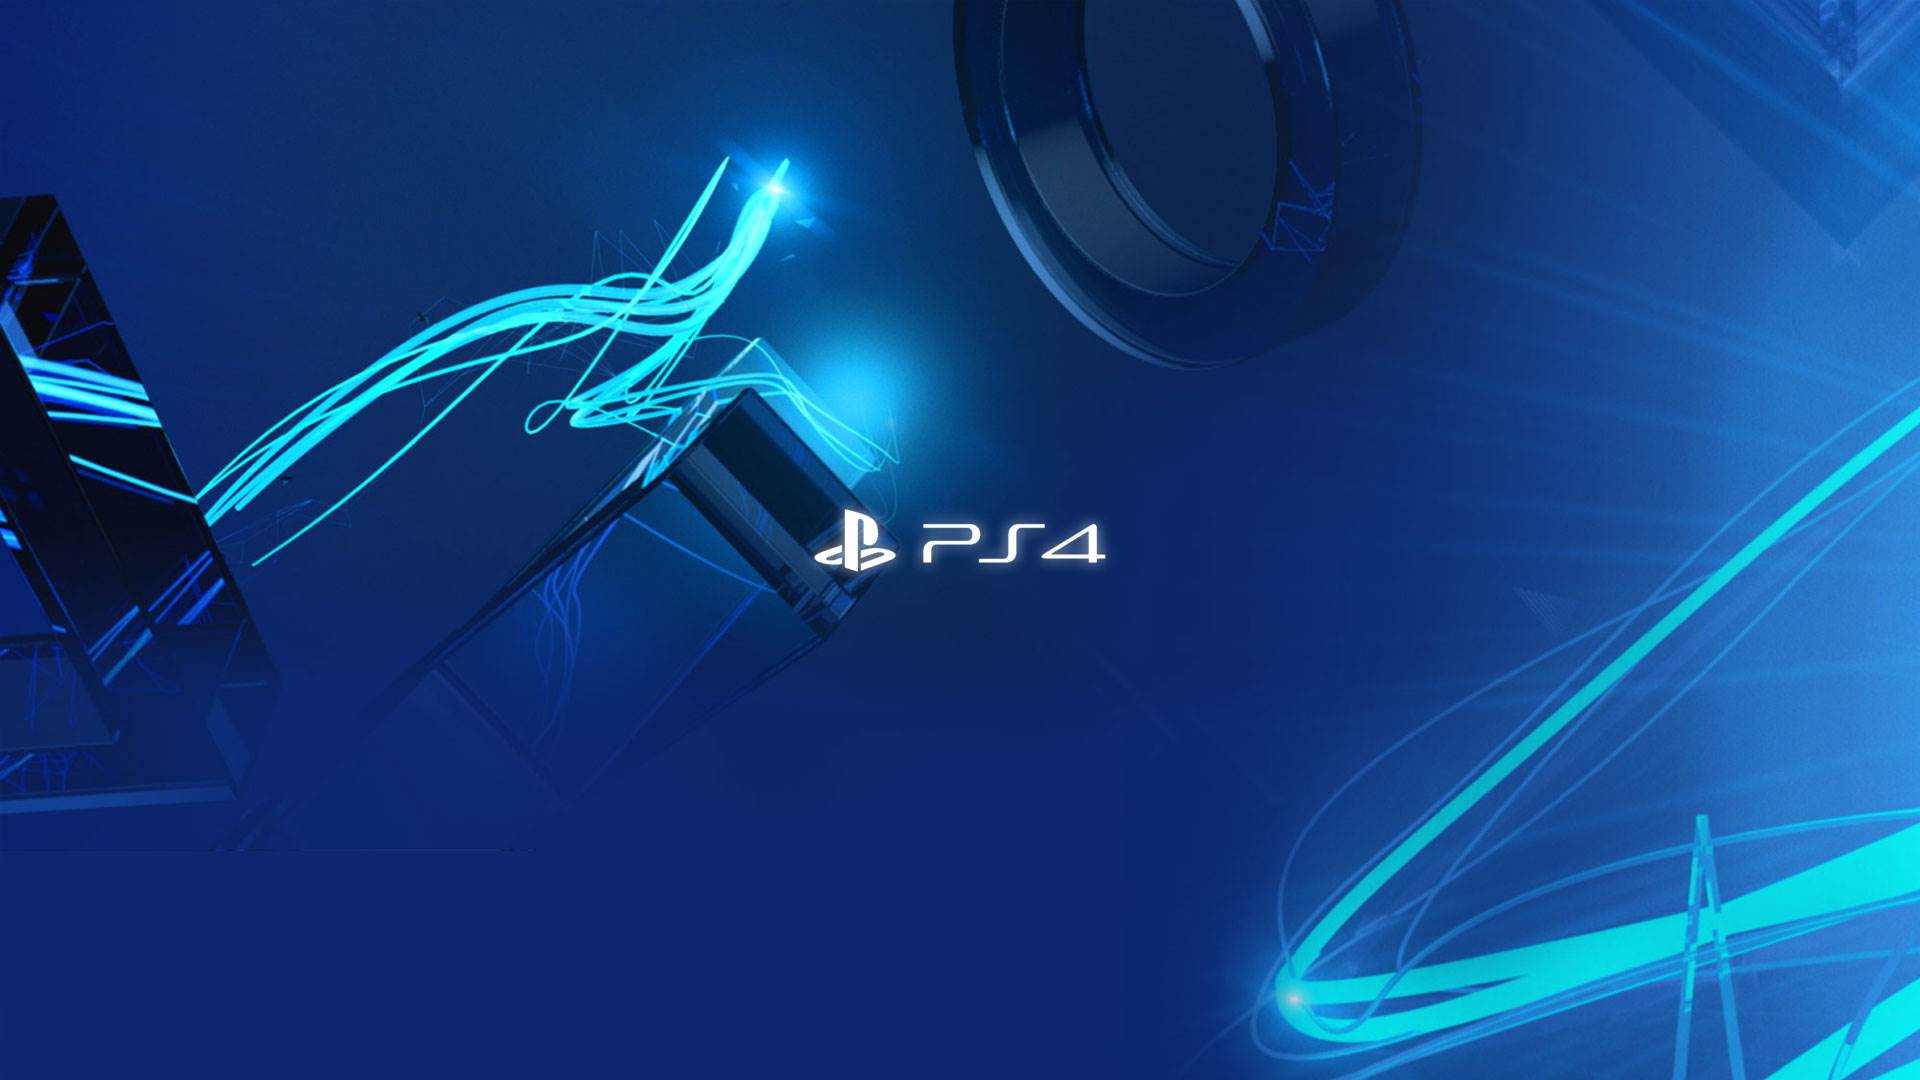 Ps4 Wallpapers Top Free Ps4 Backgrounds Wallpaperaccess